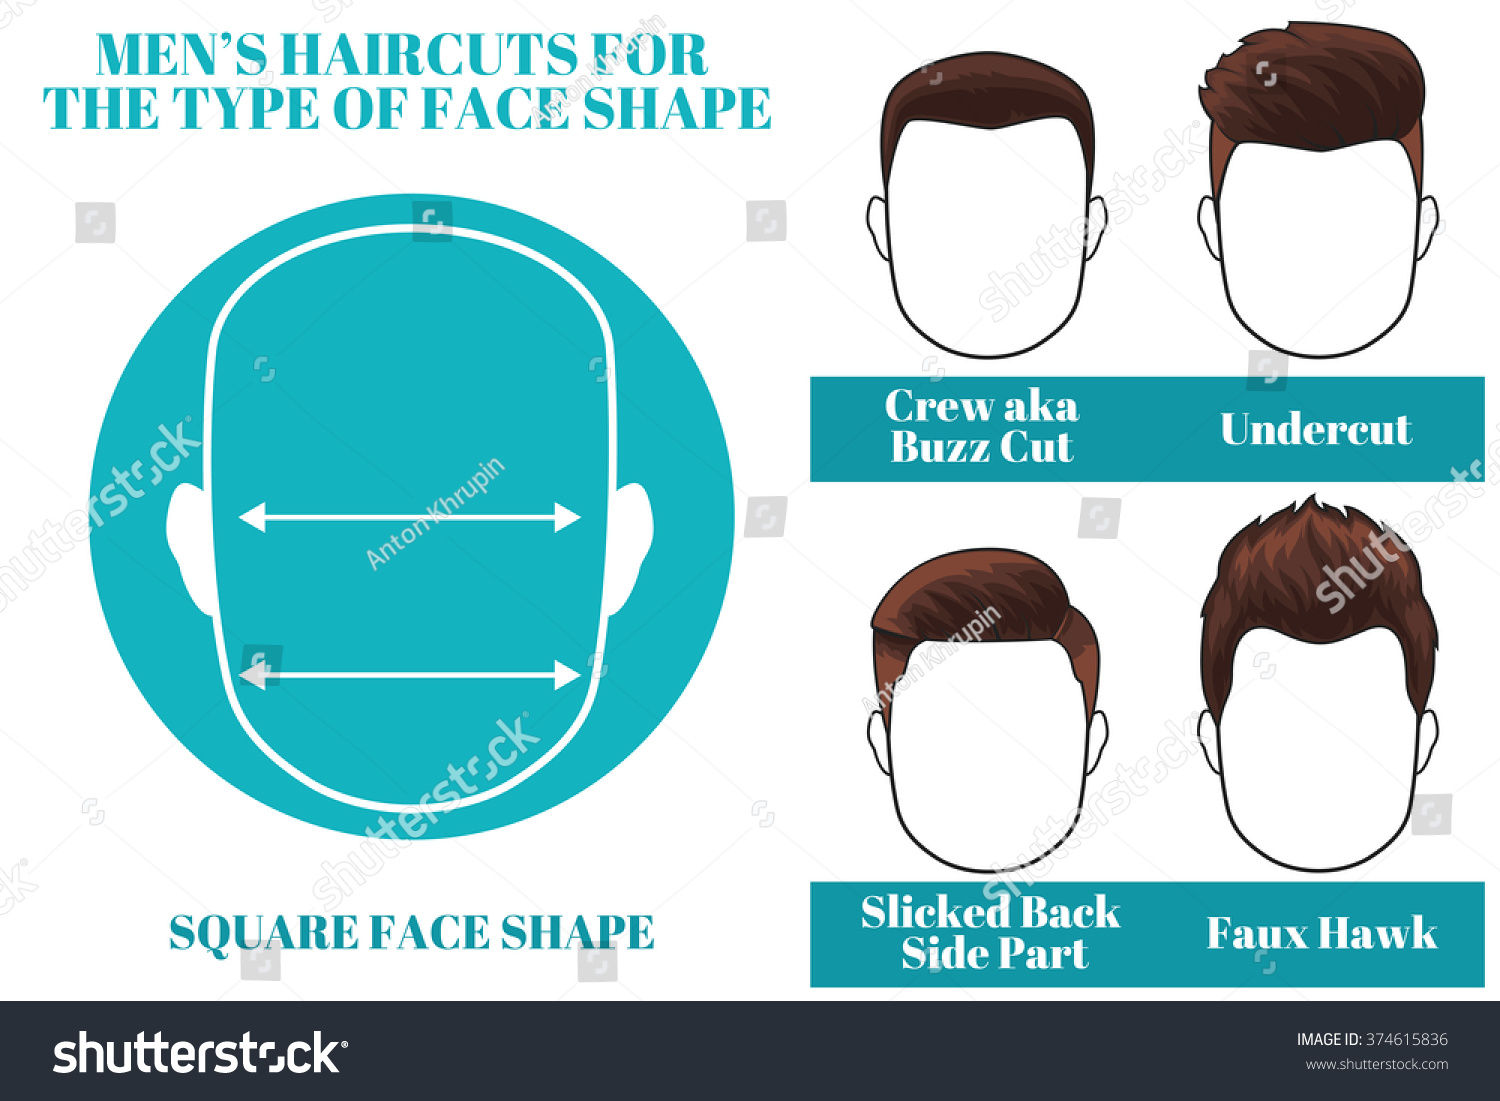 Men Haircut For Square Face / The Right Hairstyles For Men S Face